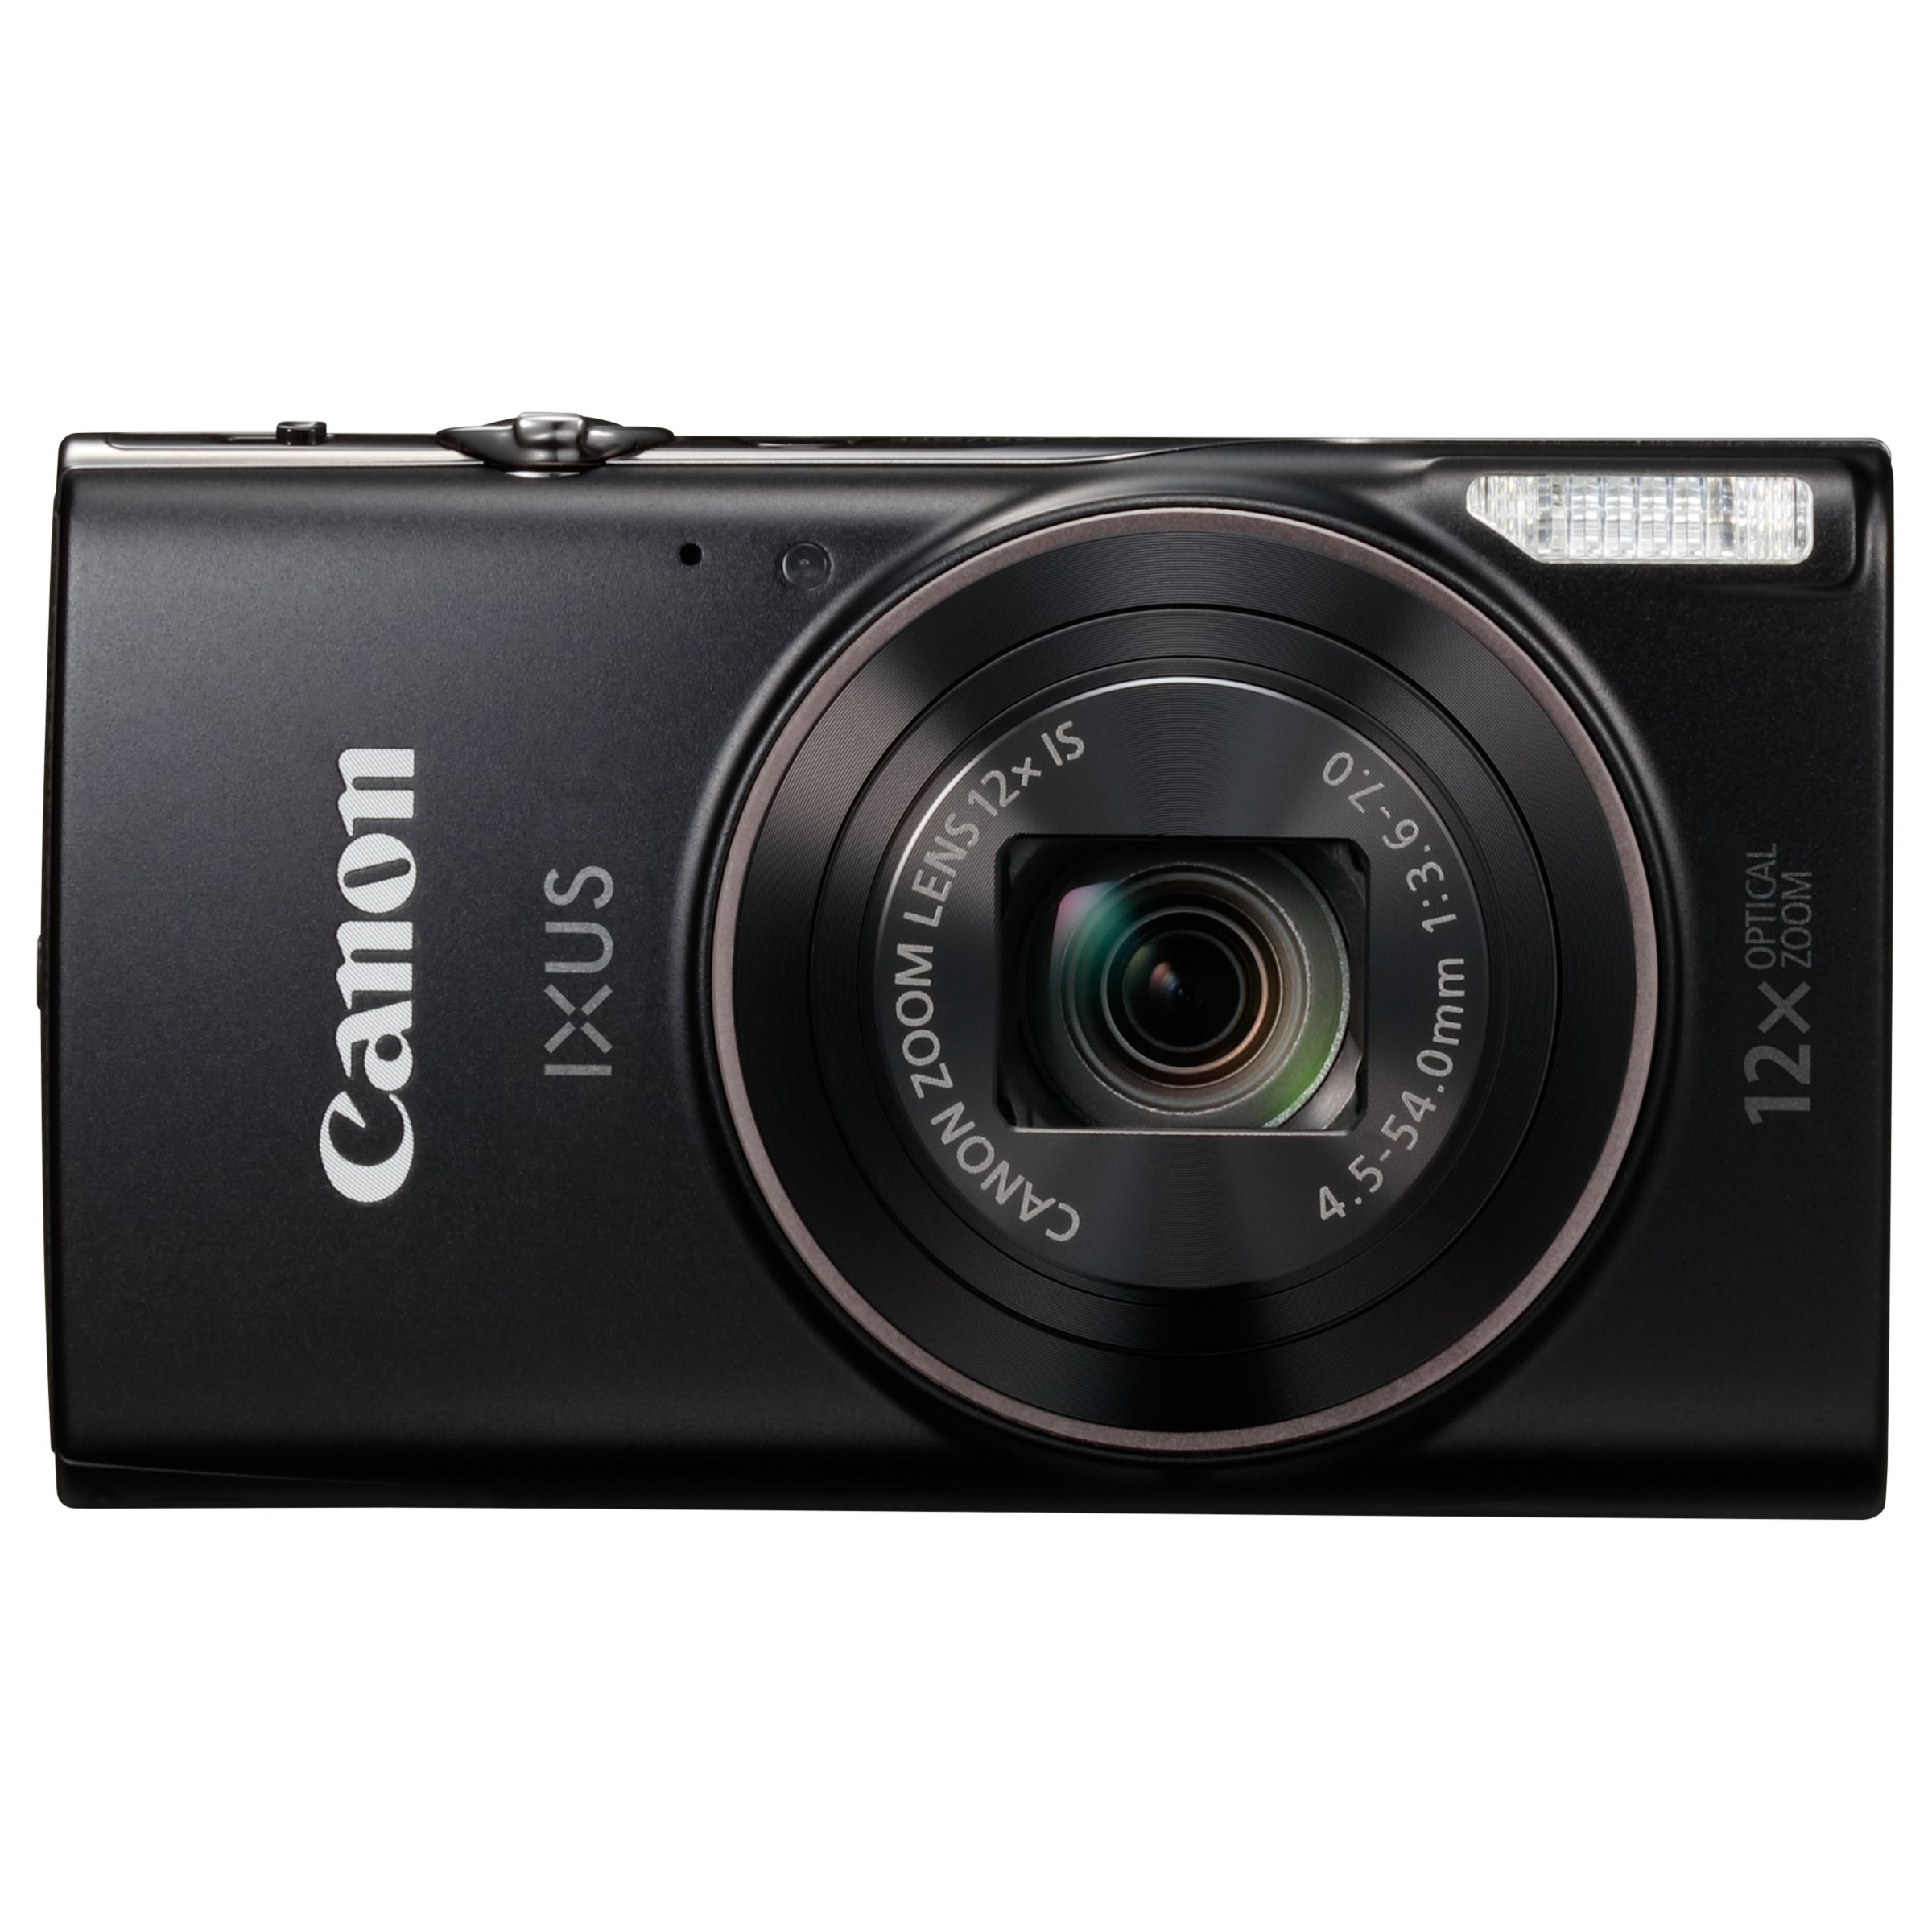 Image of Canon IXUS 285 HS Digital Camera Kit Full HD 1080p 202MP 12x Optical Zoom 24x Zoom Plus WiFi NFC 3 LCD Screen With Leather Case and 16GB SD Card